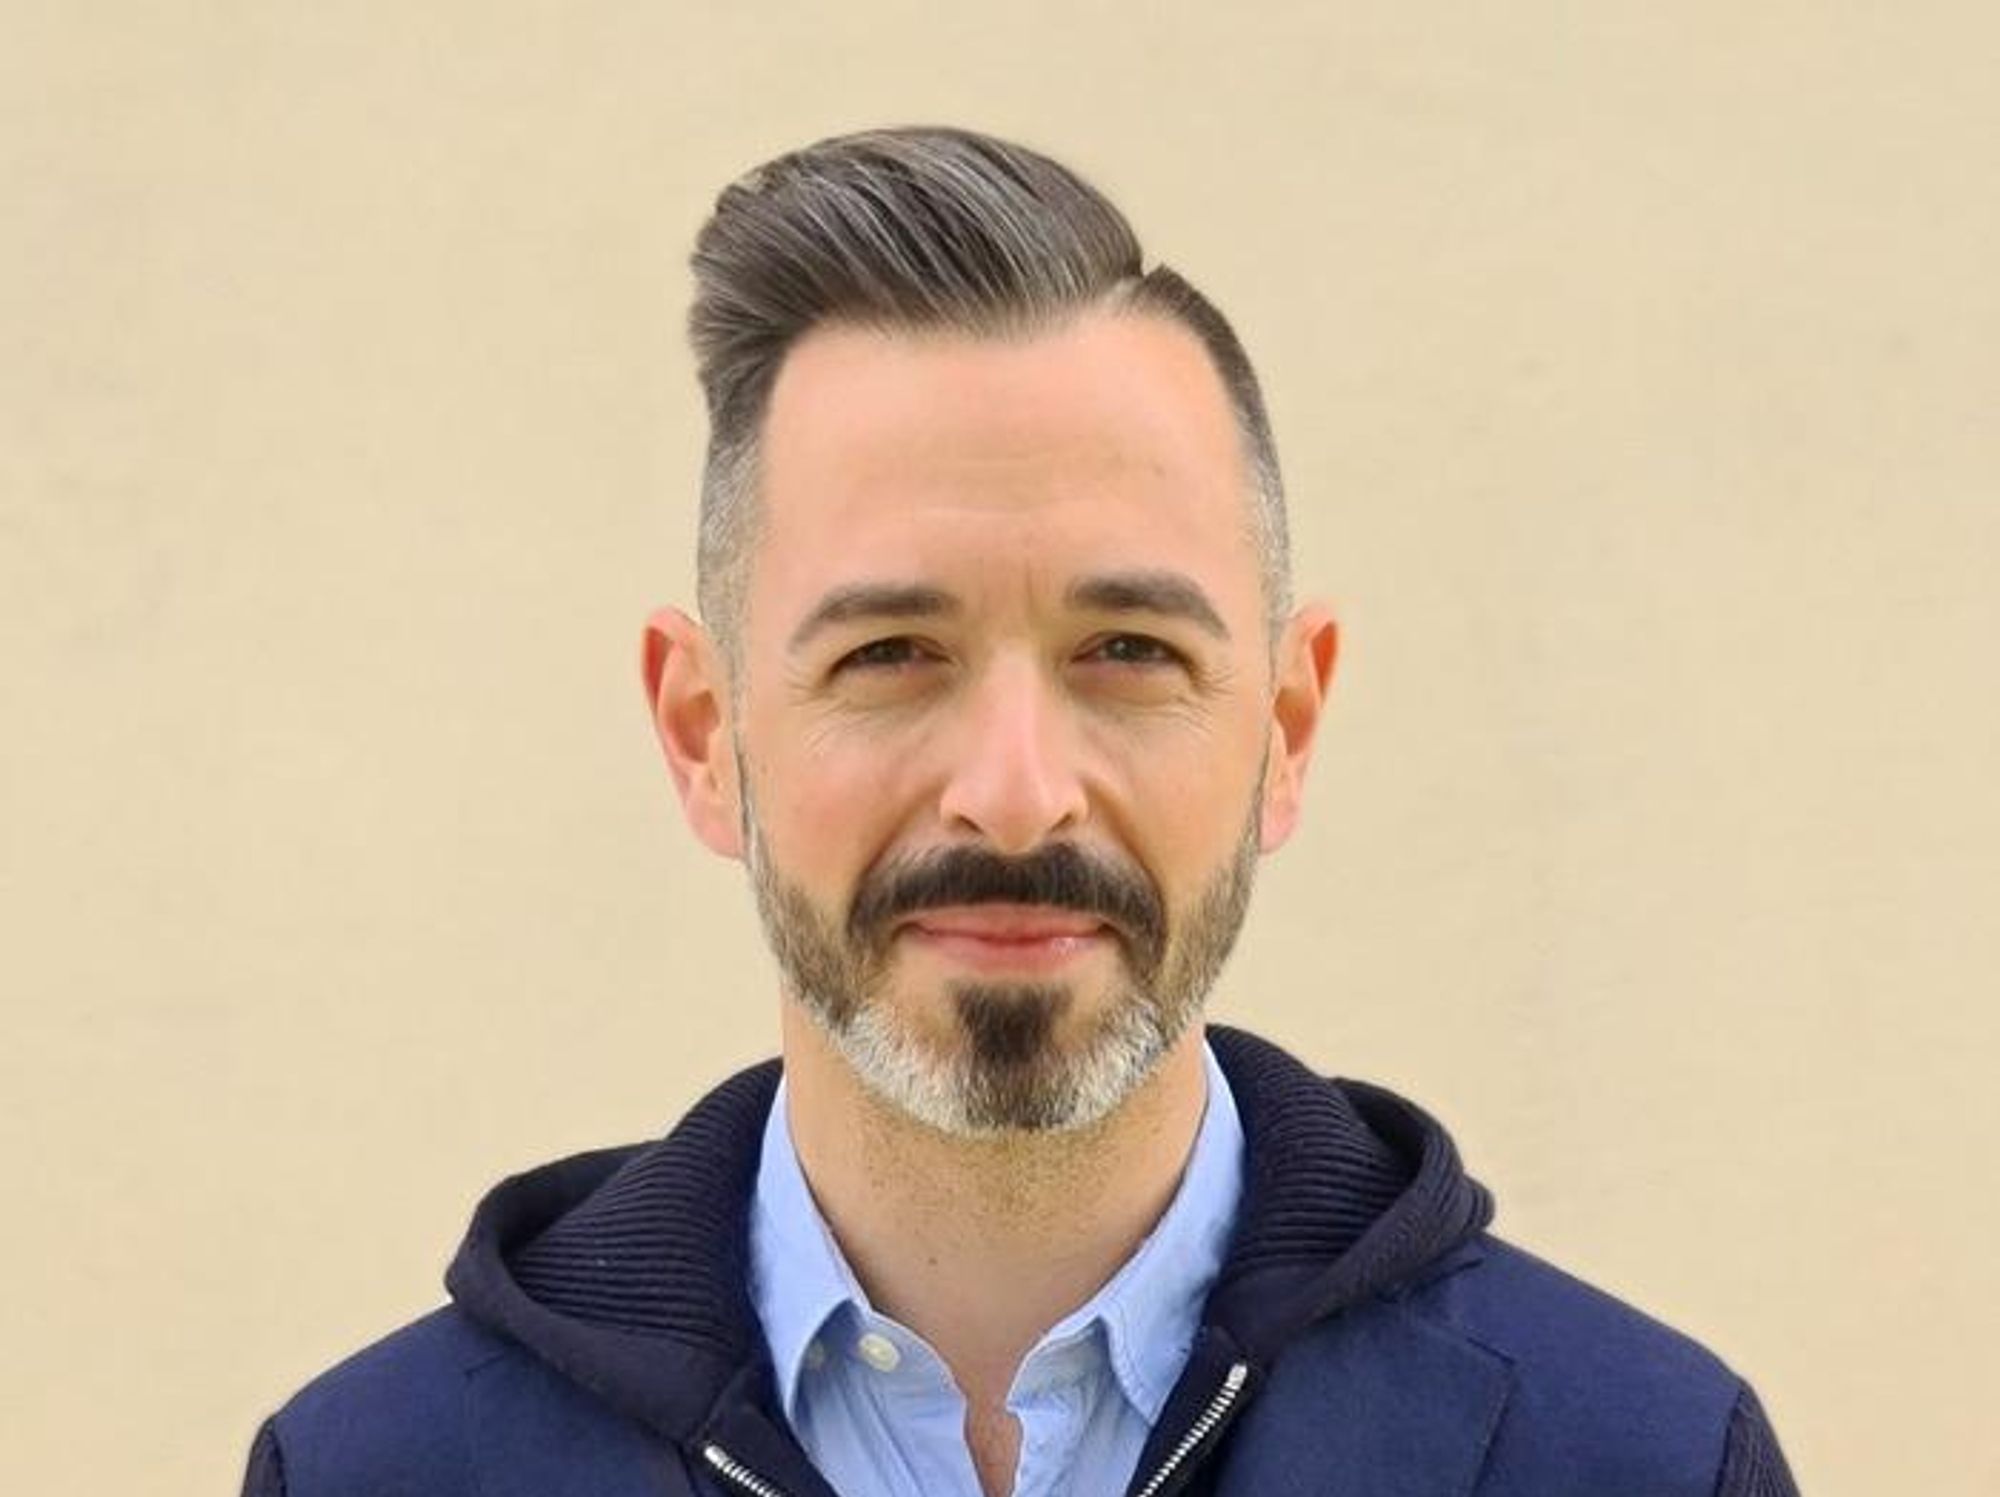 SparkToro Co-Founder Rand Fishkin on ‘Chill’ Work and the Problem With VC